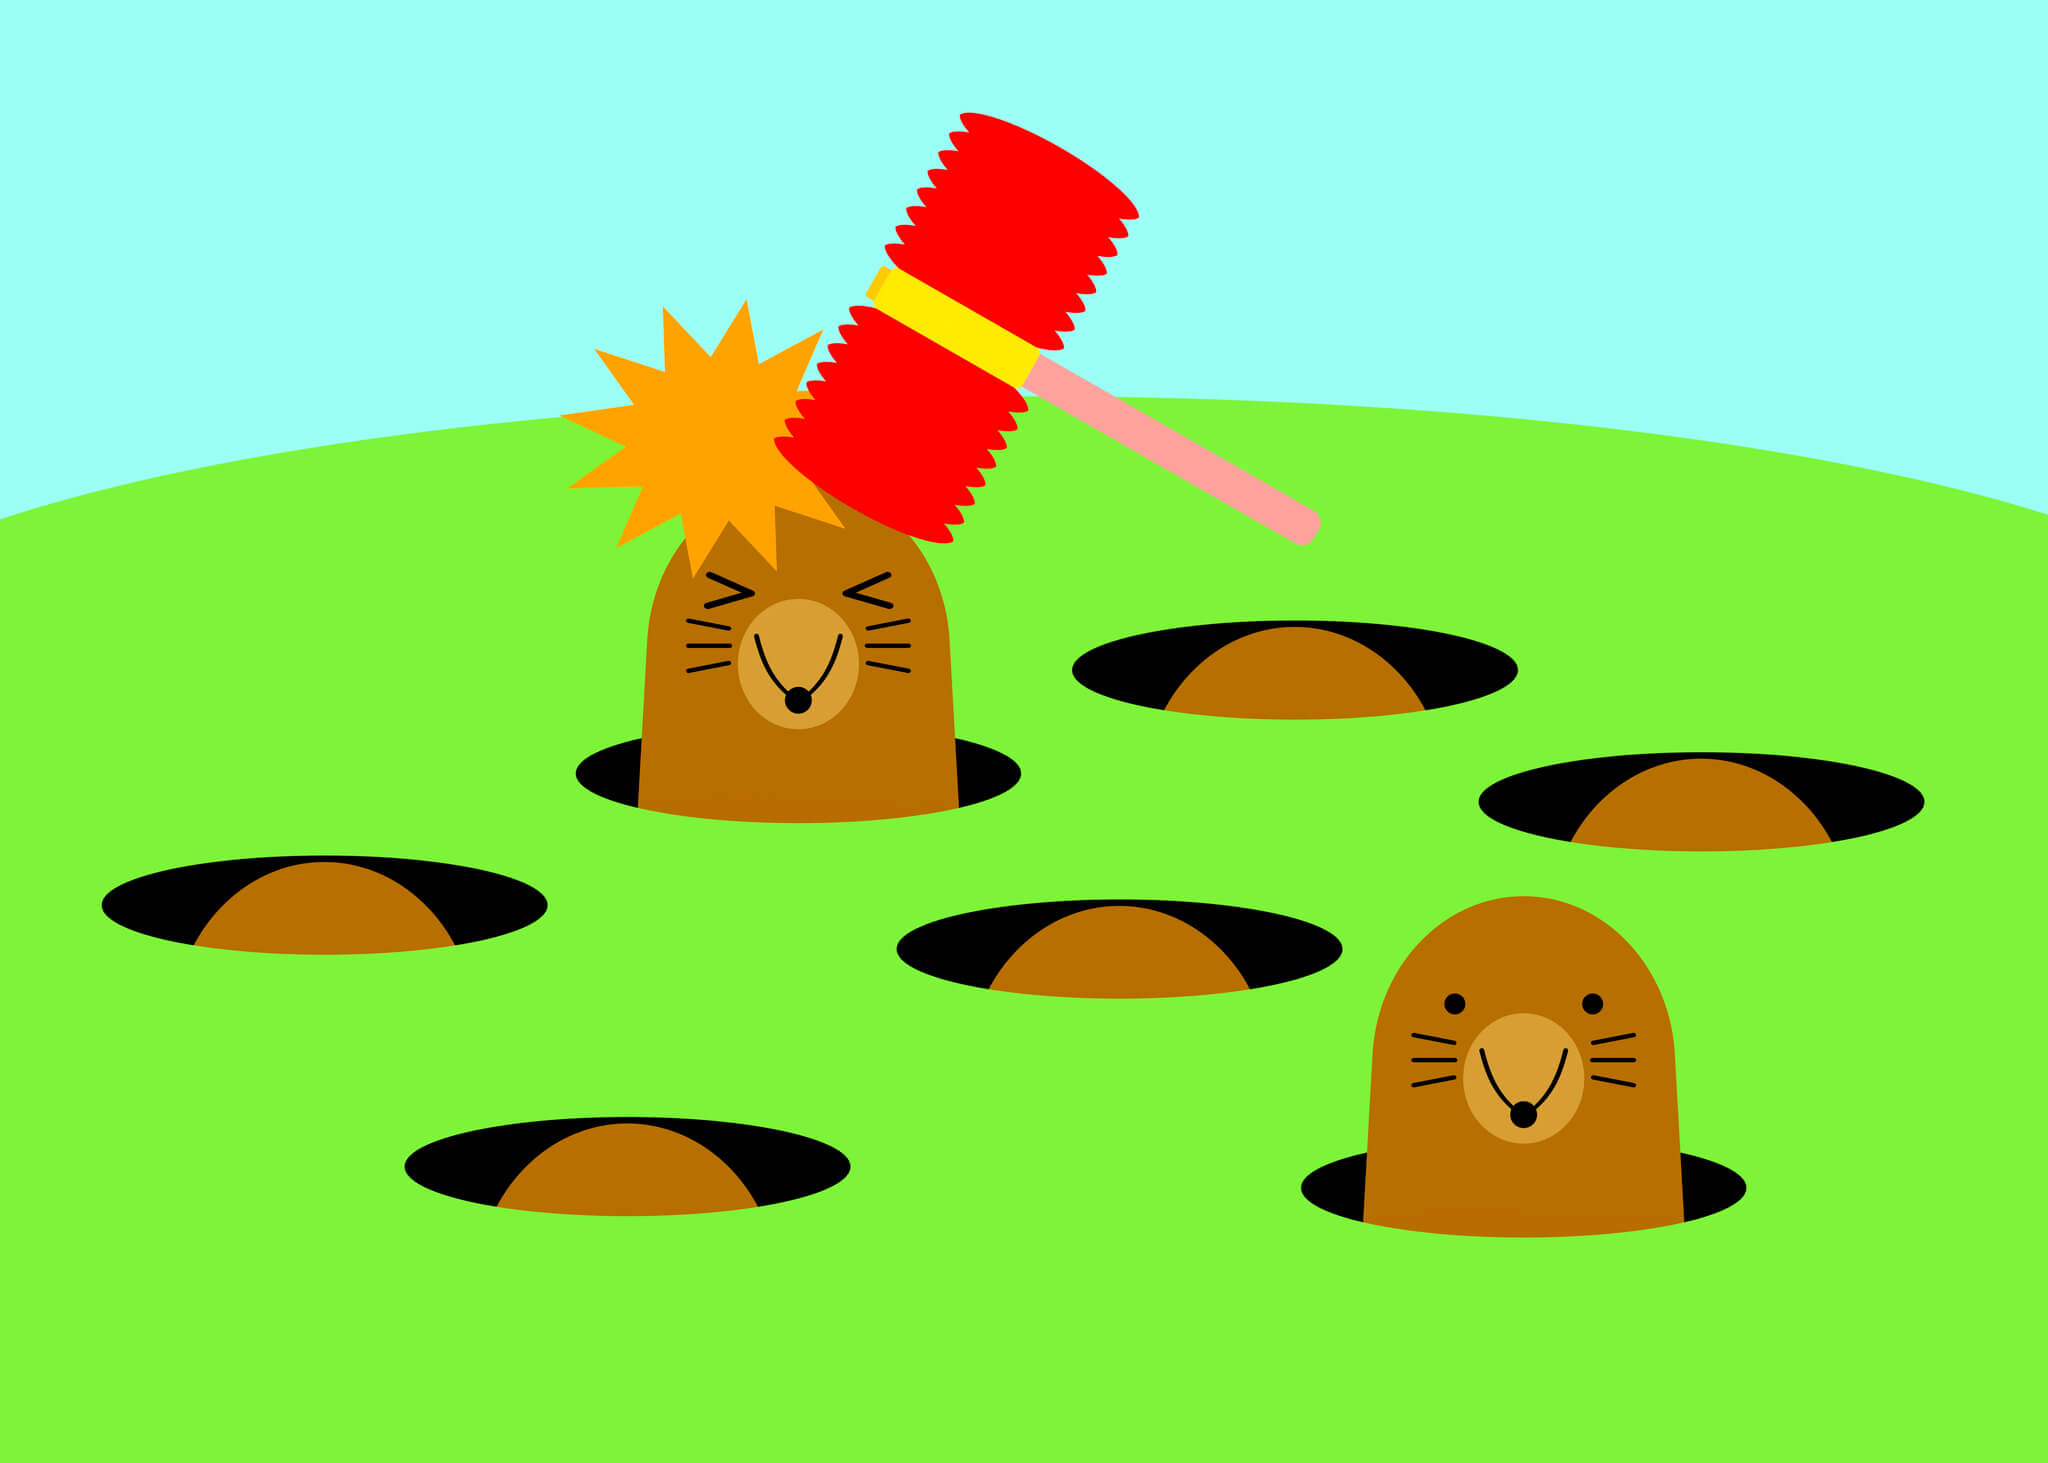 A mole is hit by a red hammer against a green and blue background